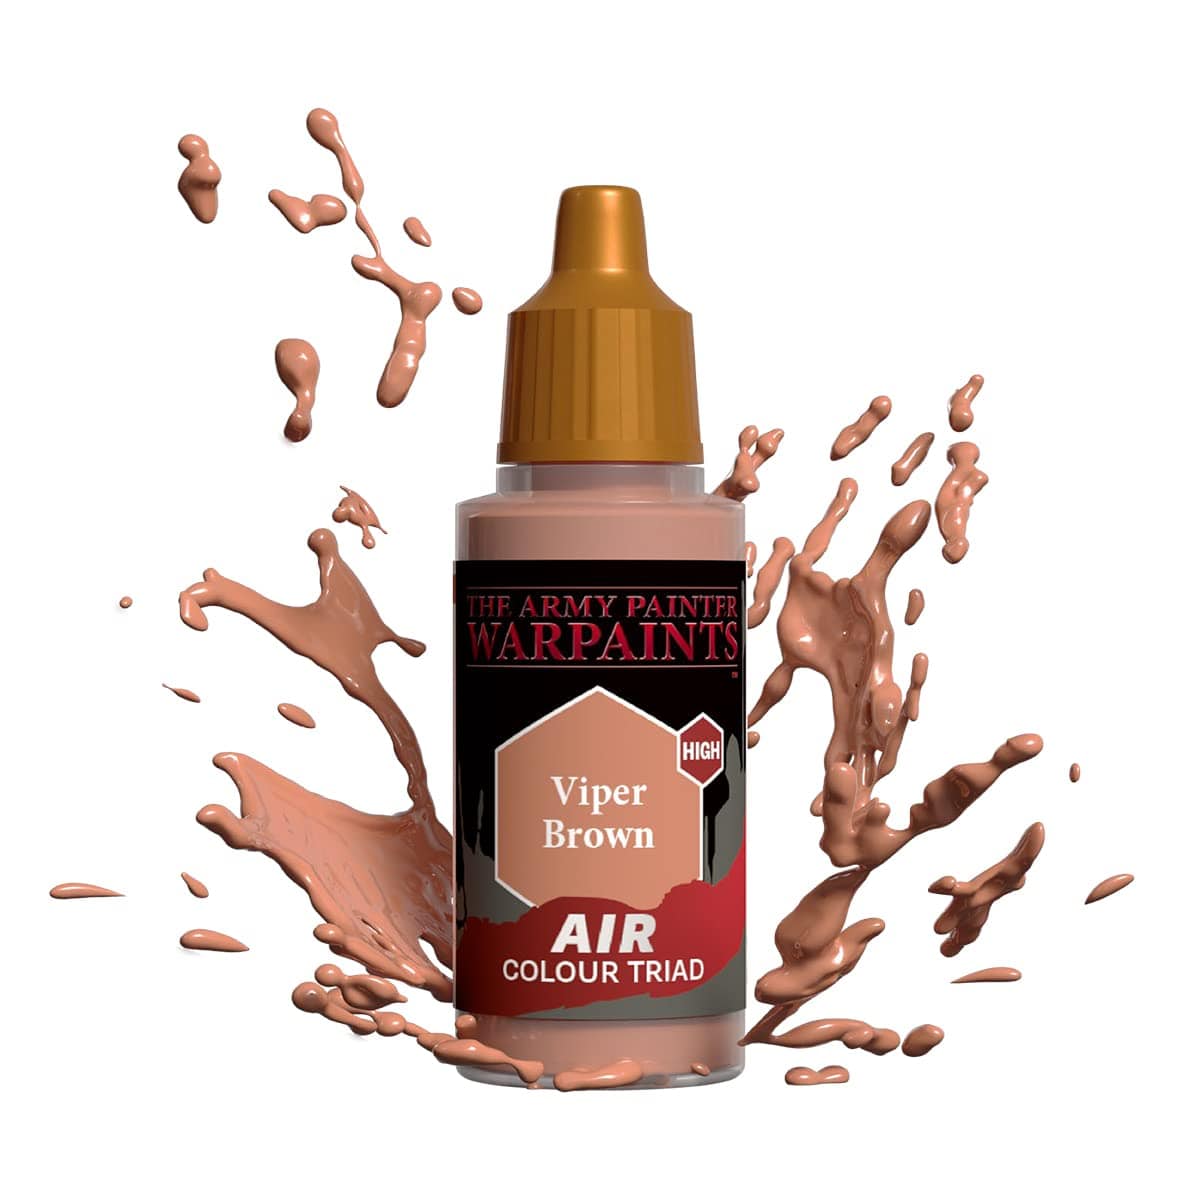 The Army Painter Accessories The Army Painter Warpaints Air: Viper Brown 18ml